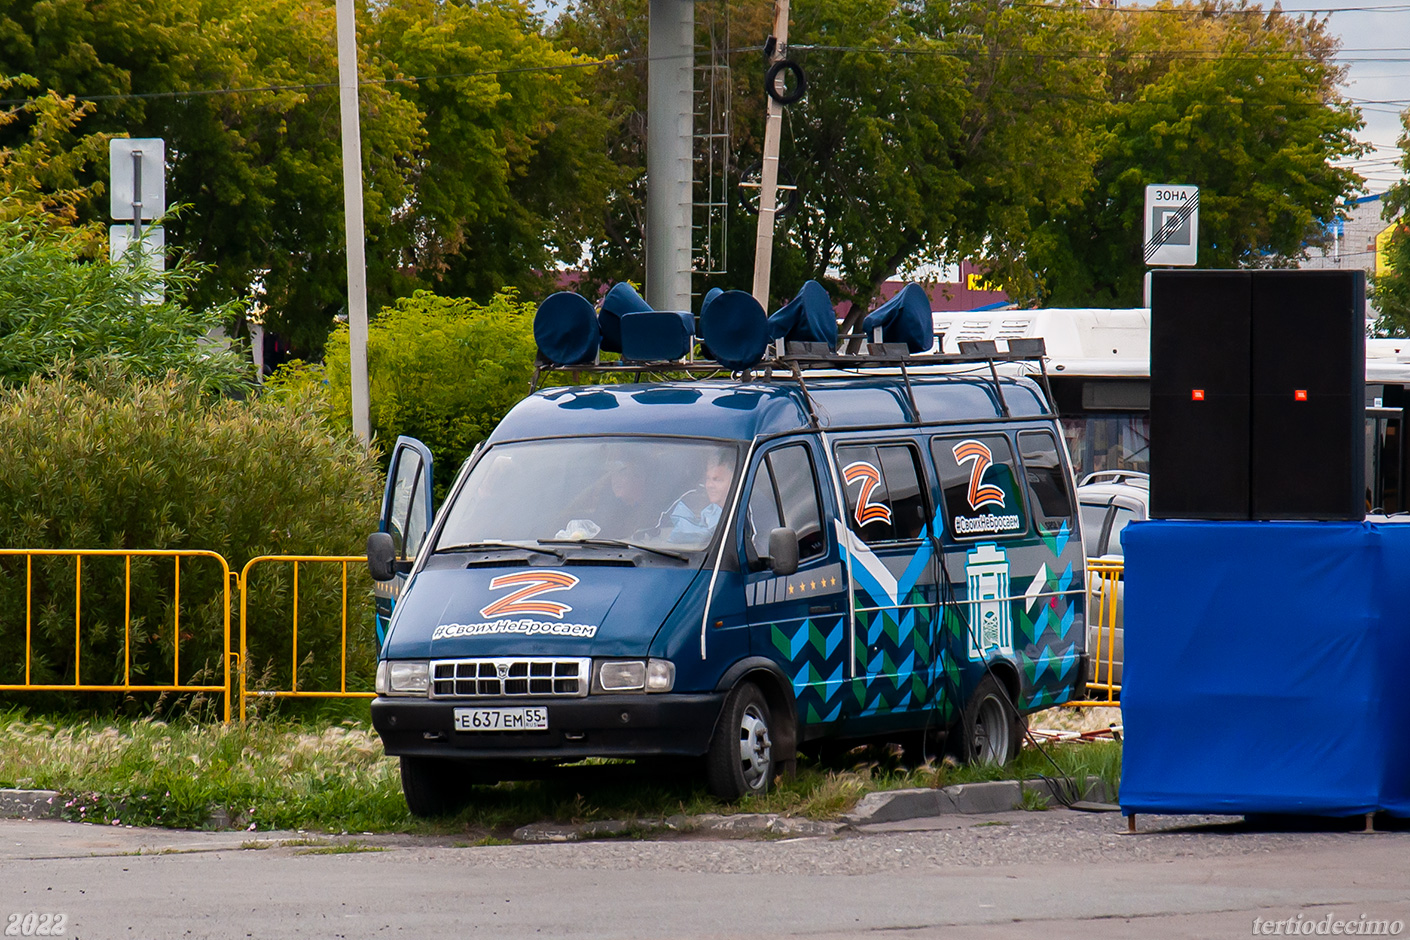 Omsk region, GAZ-322132 (XTH, X96) # Е 637 ЕМ 55; Omsk region — 19.08.2022 — XXIII City competition of professional skills of bus drivers